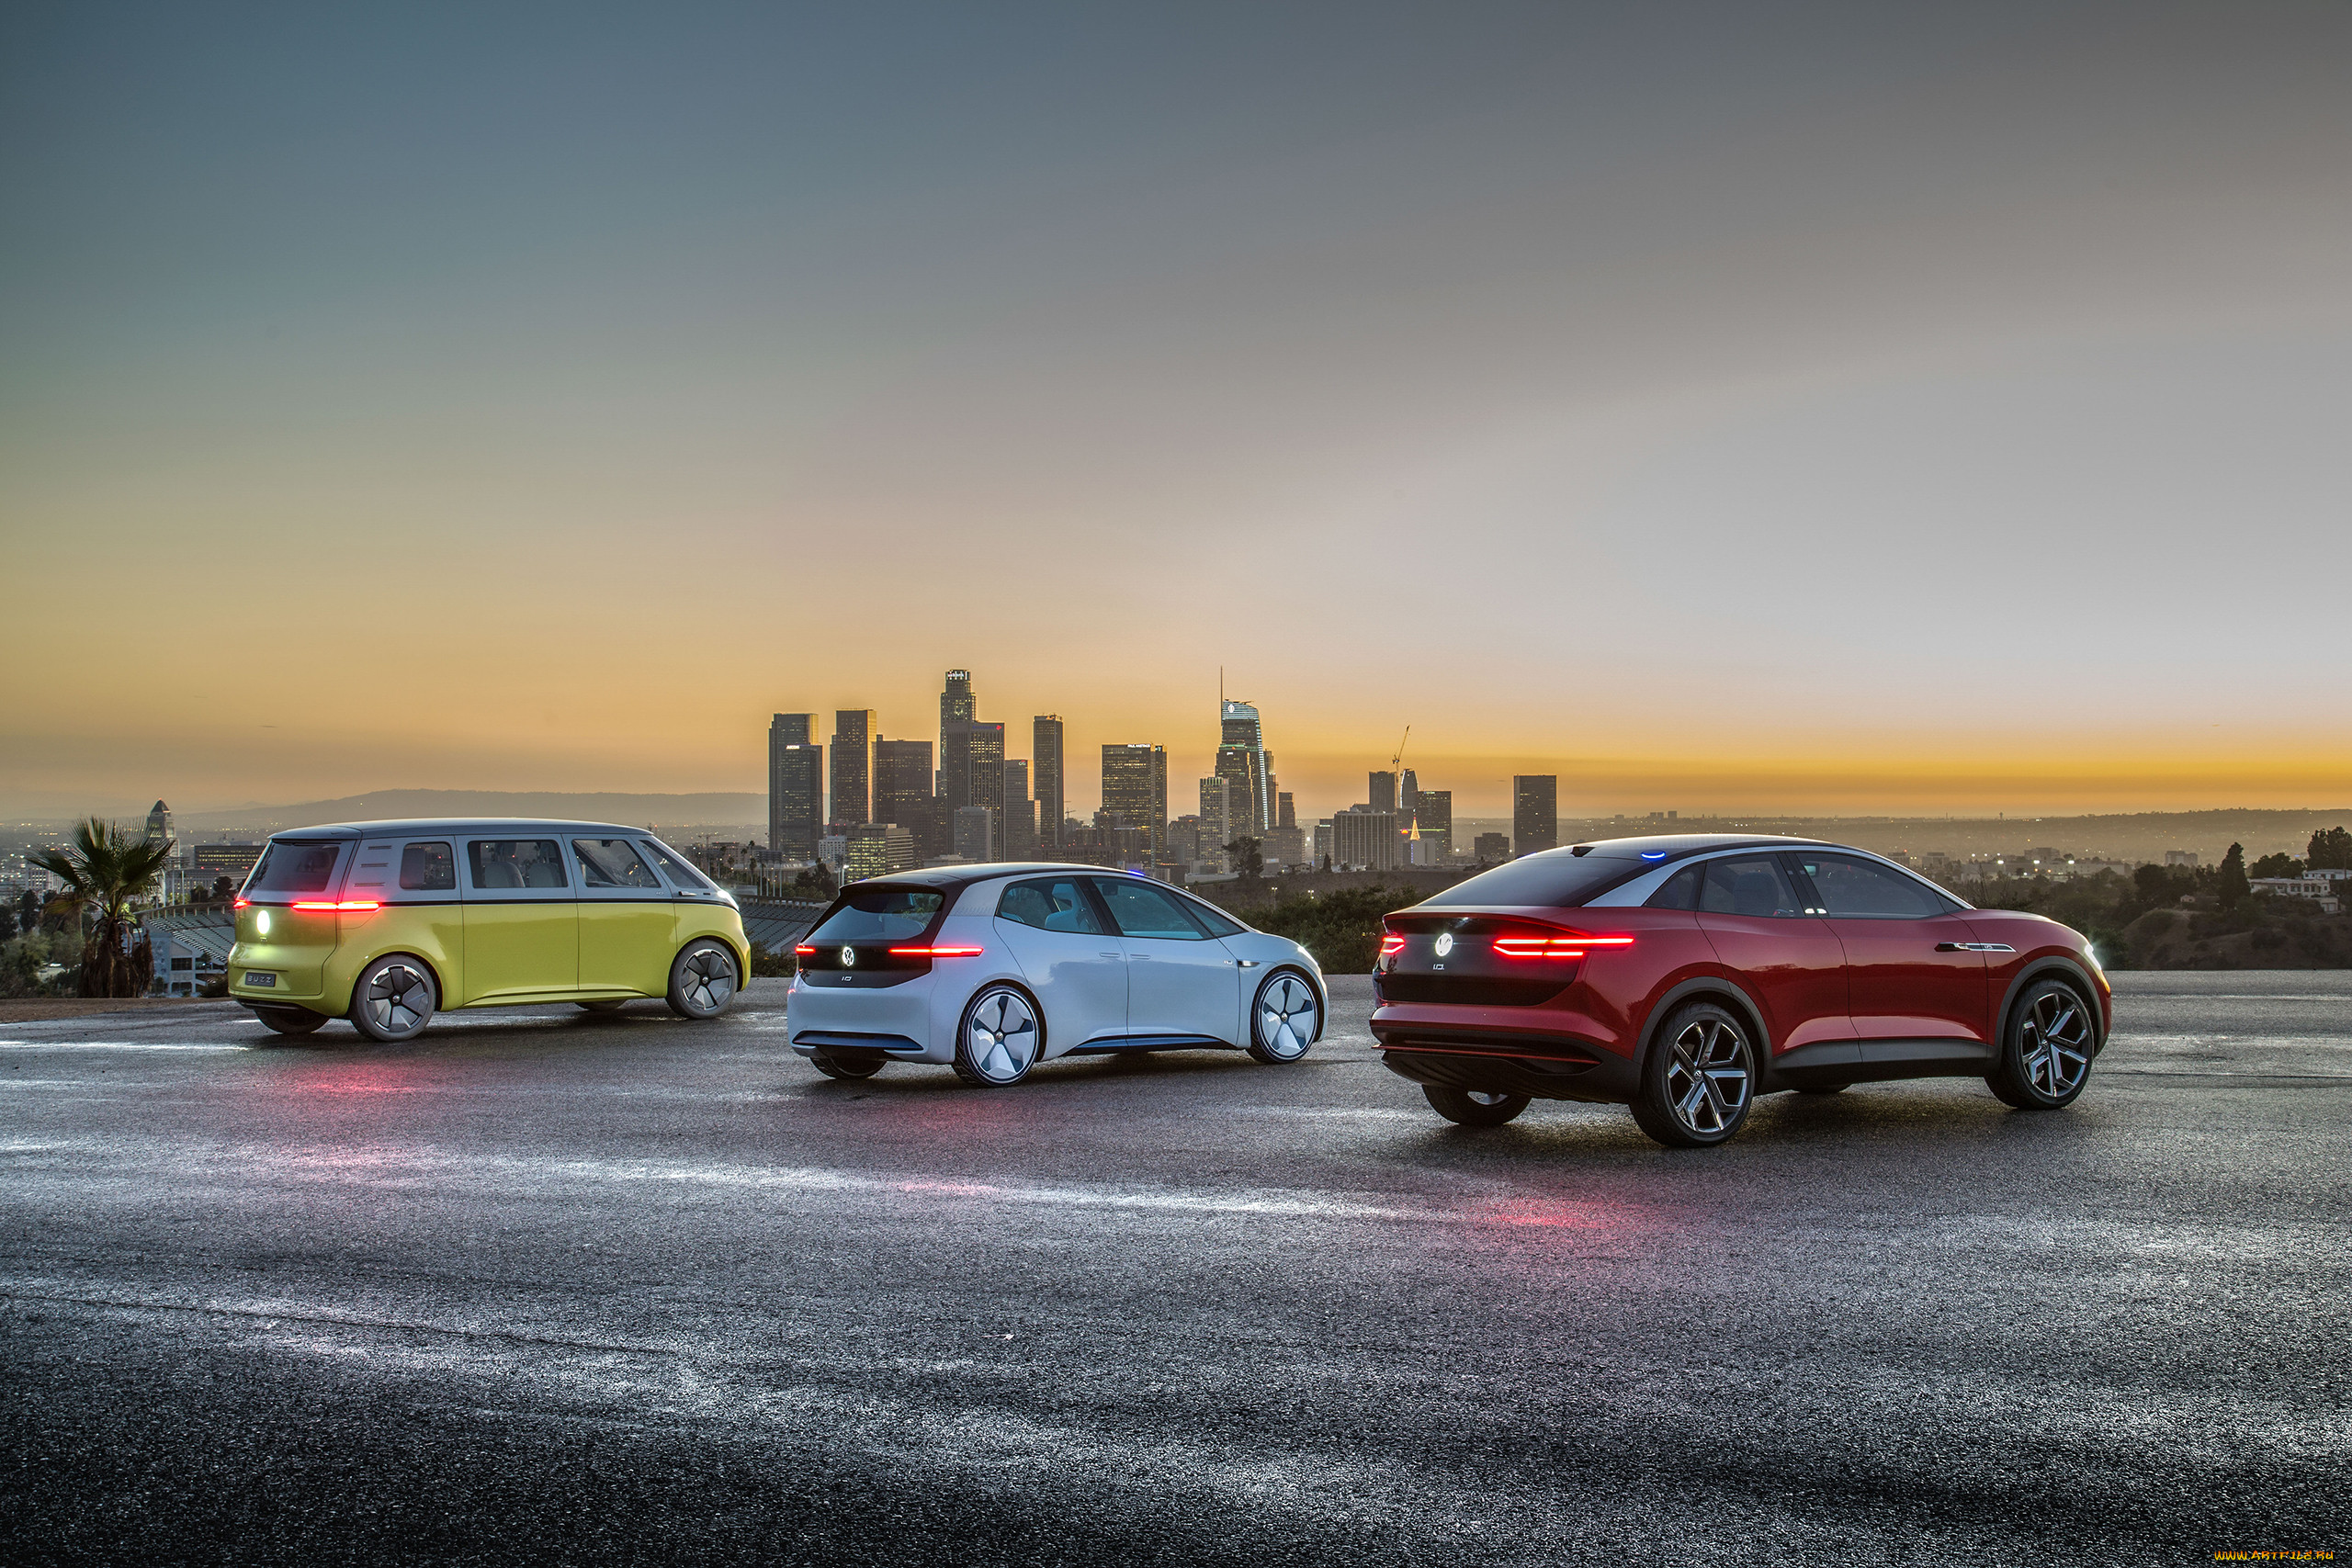 volkswagen id family concepts 2017, , volkswagen, 2017, concepts, id, family